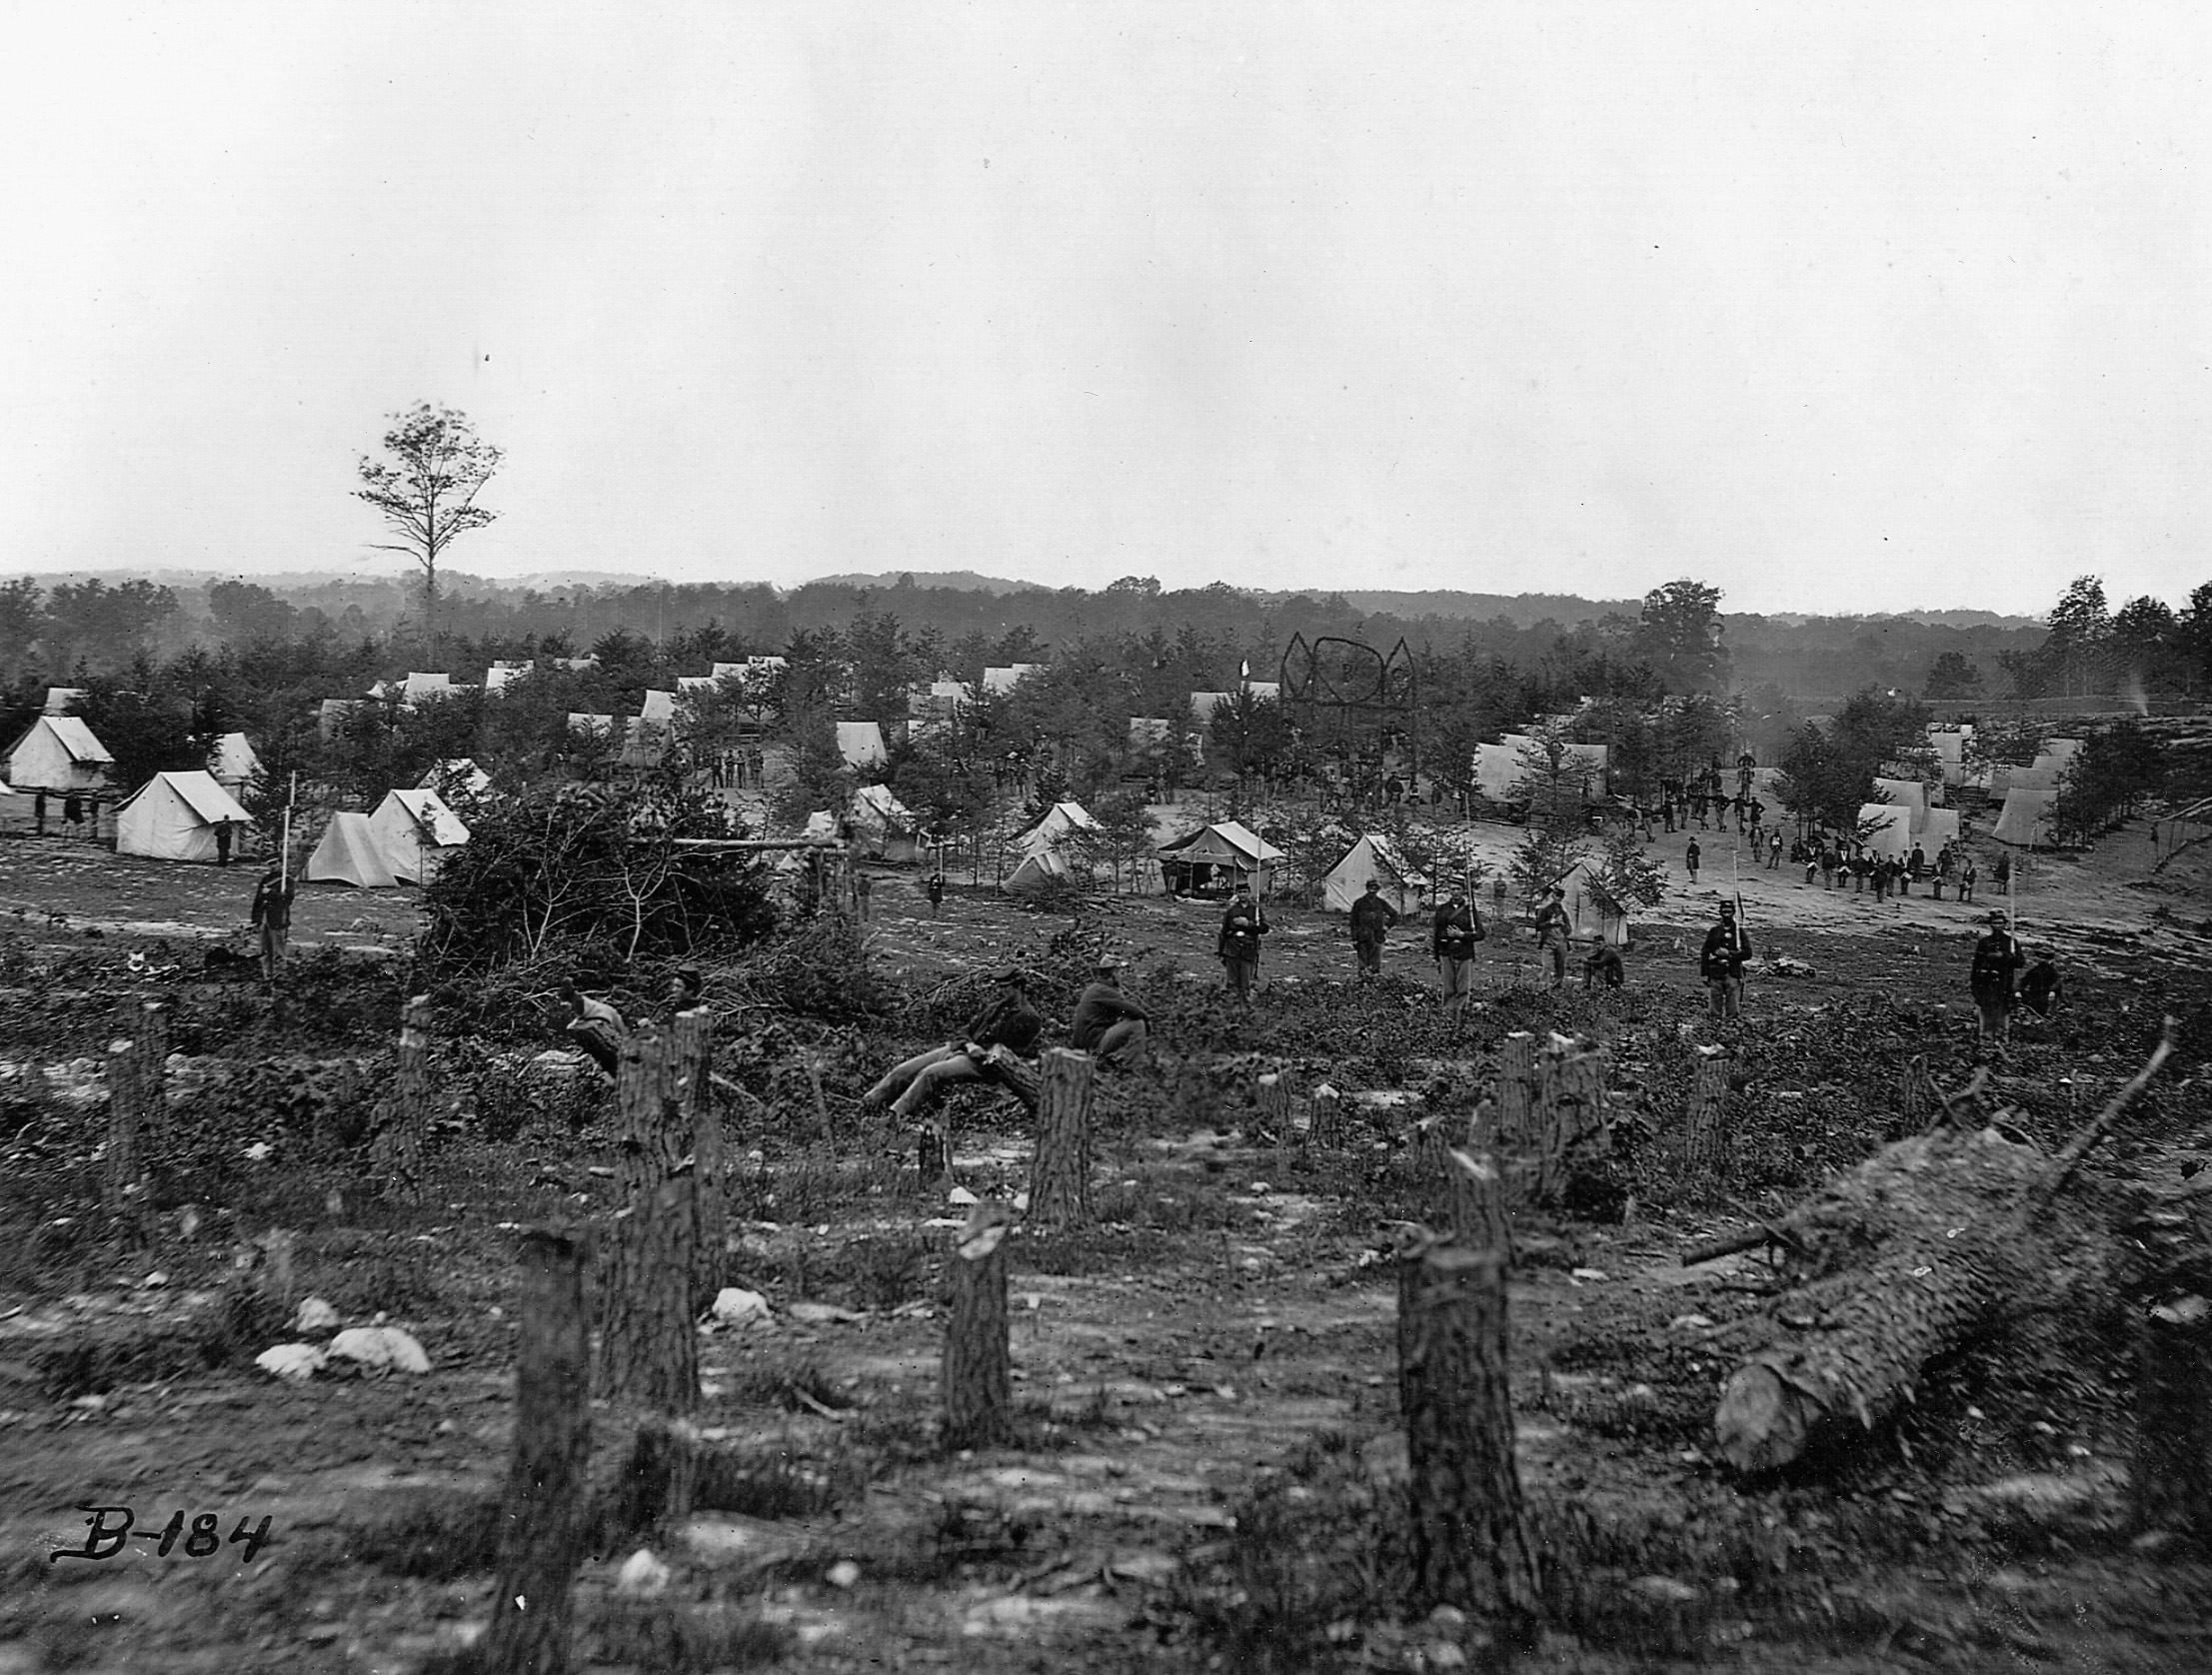 The forests of northern Virginia did not stand a chance against the need of soldiers to build shelters and keep fires burning. Sentries stand guard in front of rows of tents. The “B” hanging on the laurelled structure in the center of the photo designates the area as Company B’s camp.